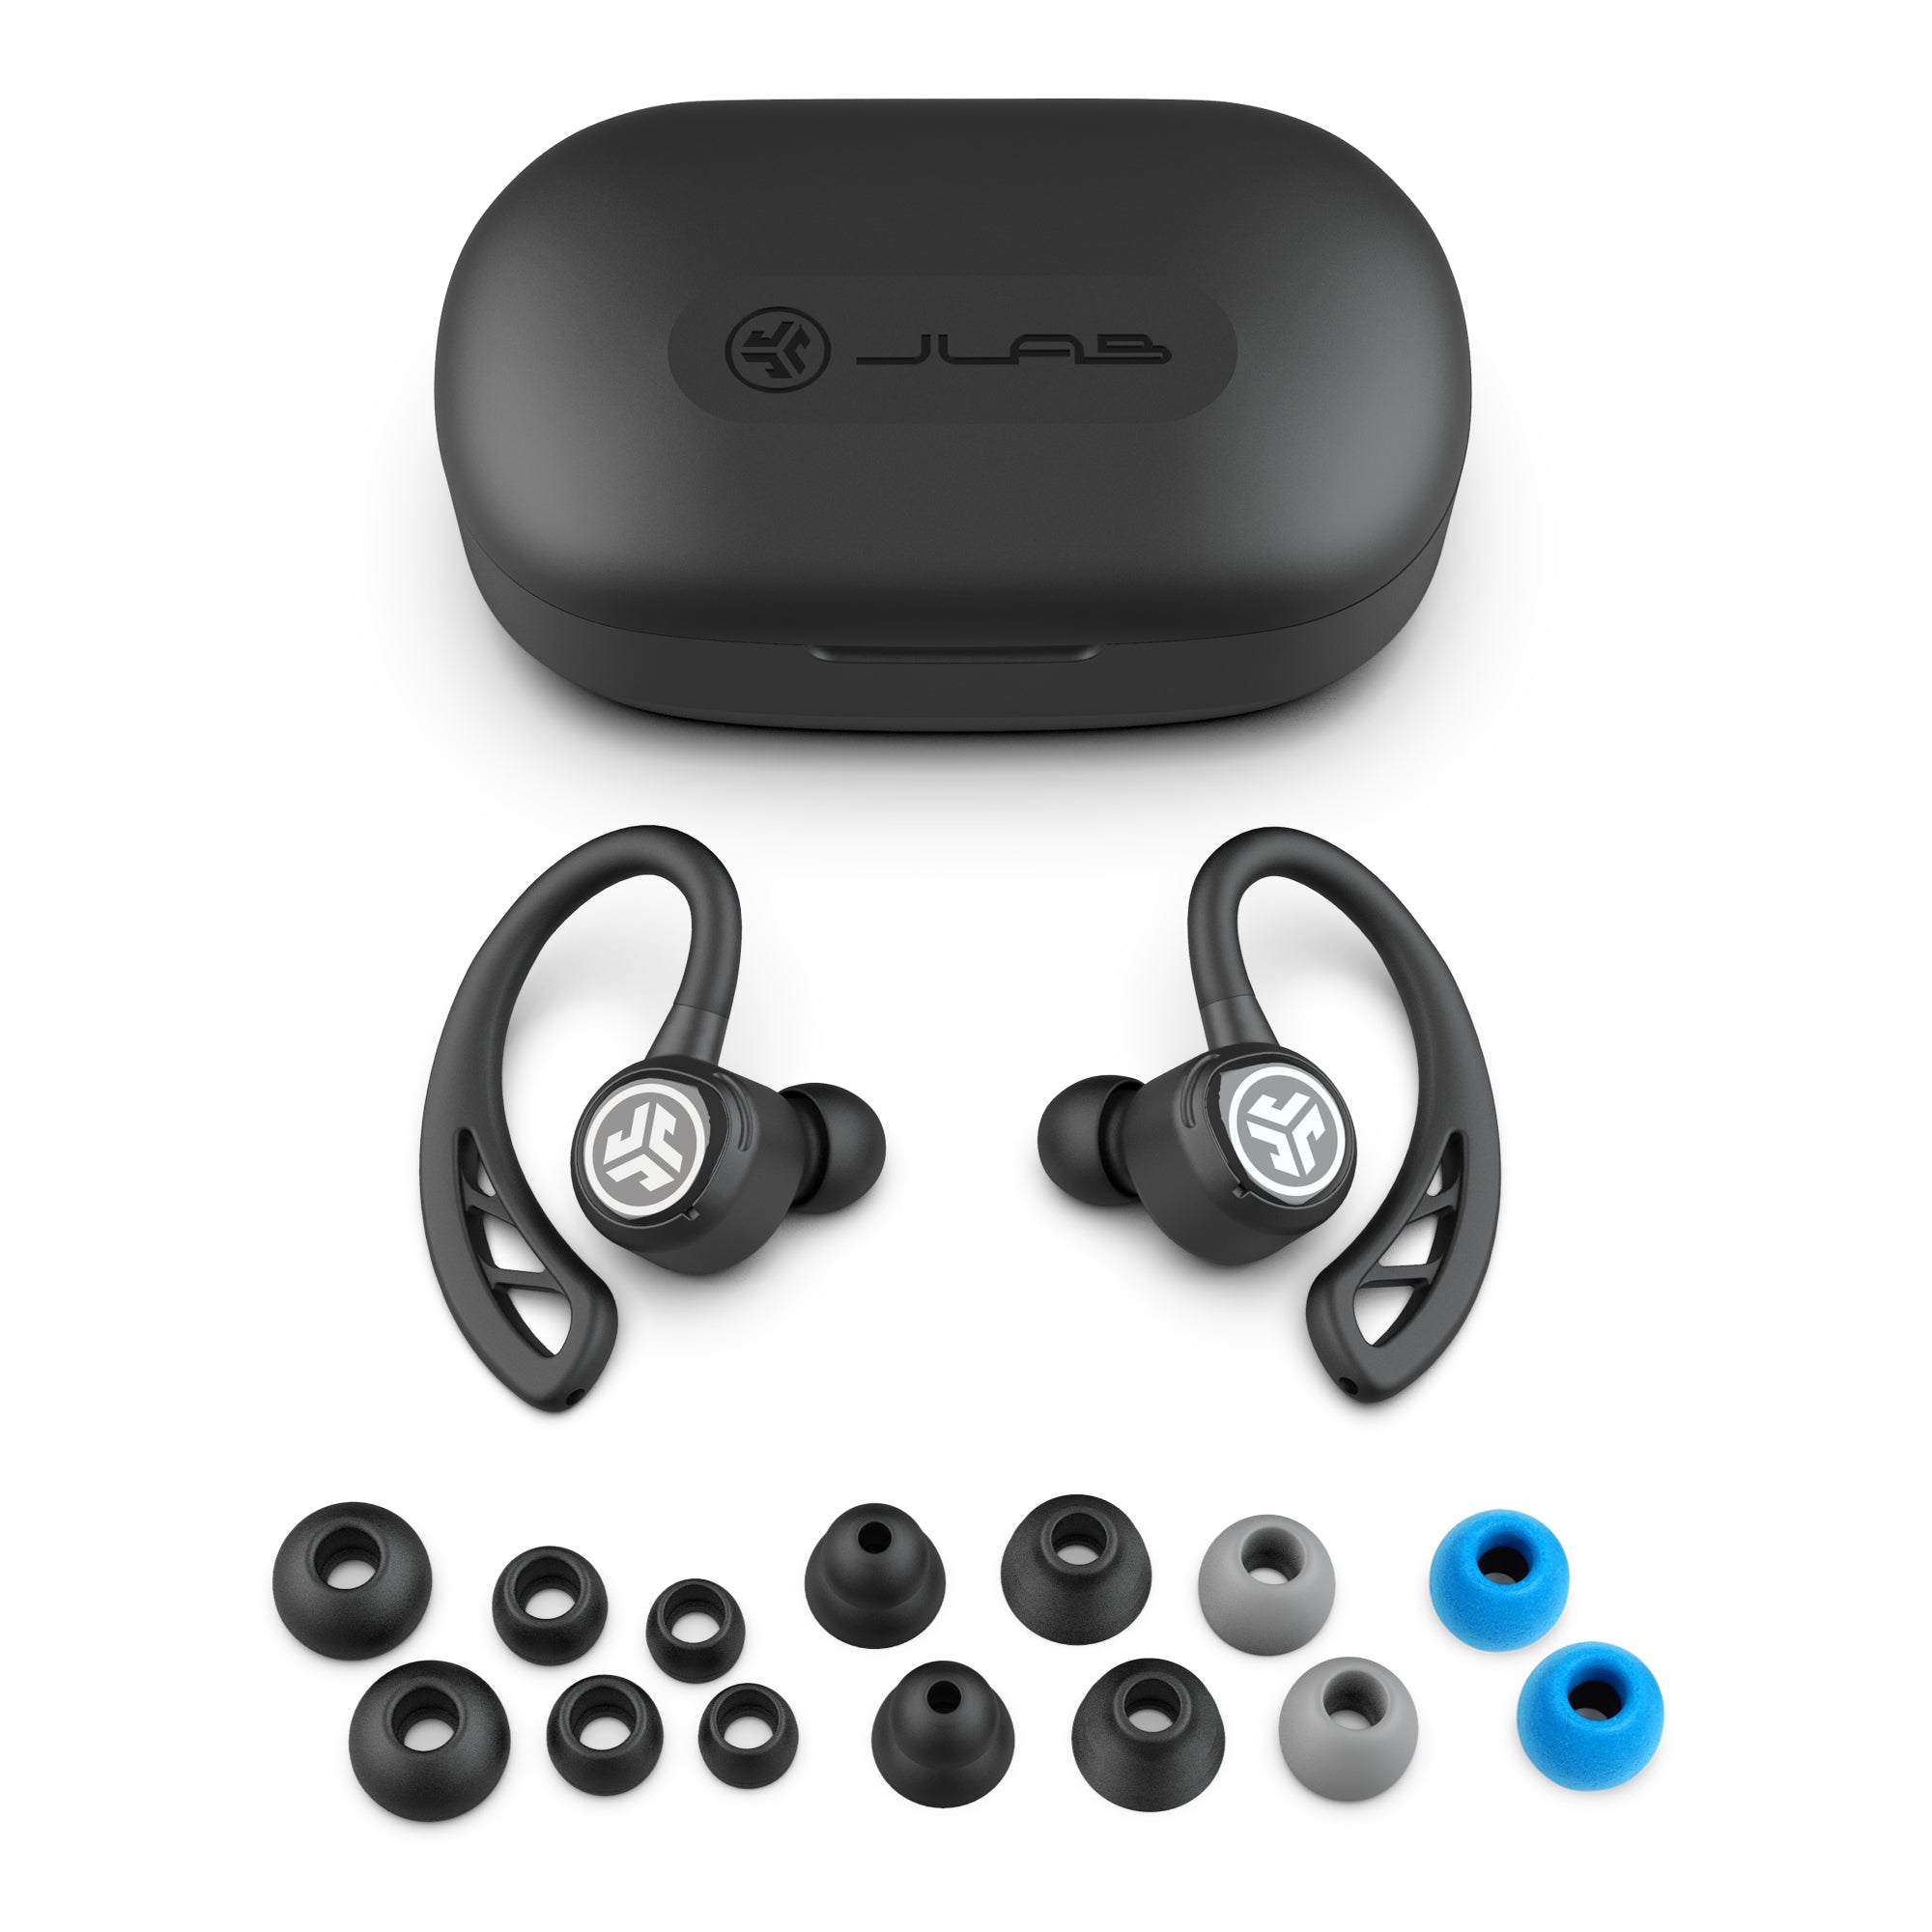 Black Epic Air Sport True Wireless Earbuds in Charging Case Showing Charging Cable and Ear Tip Sizes